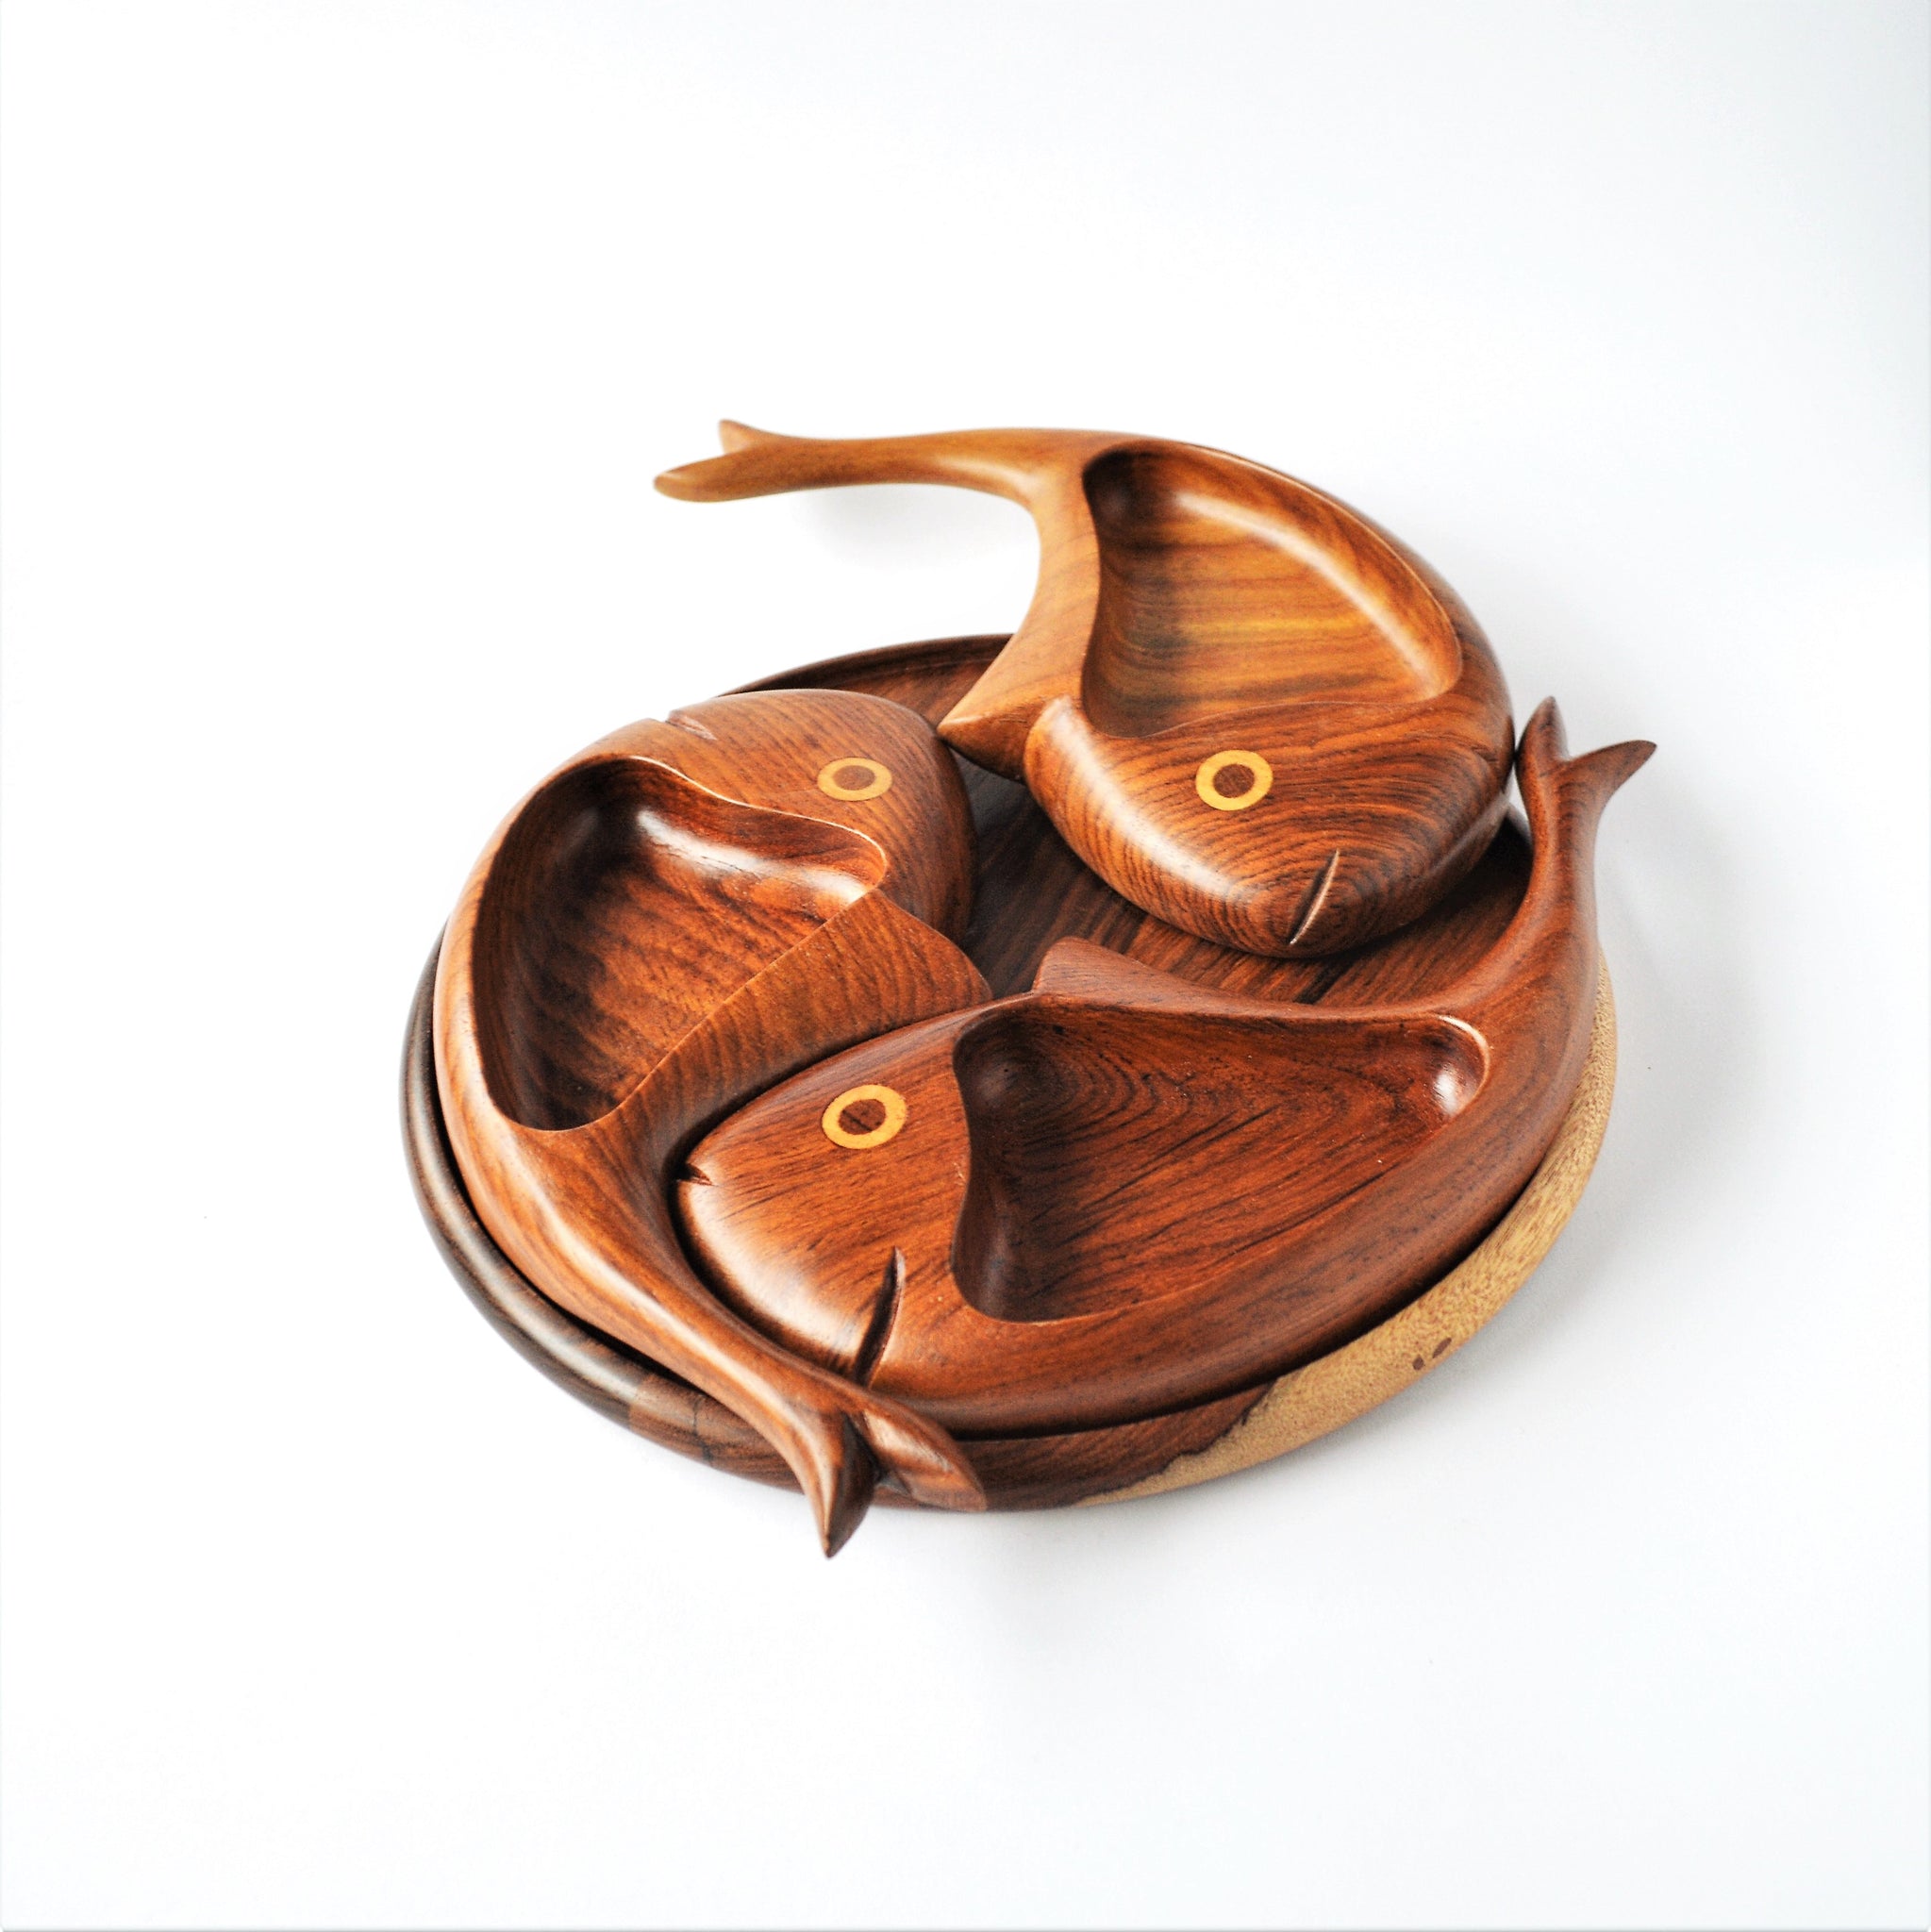 3 fish wooden decor plate, nuts tray, catchall